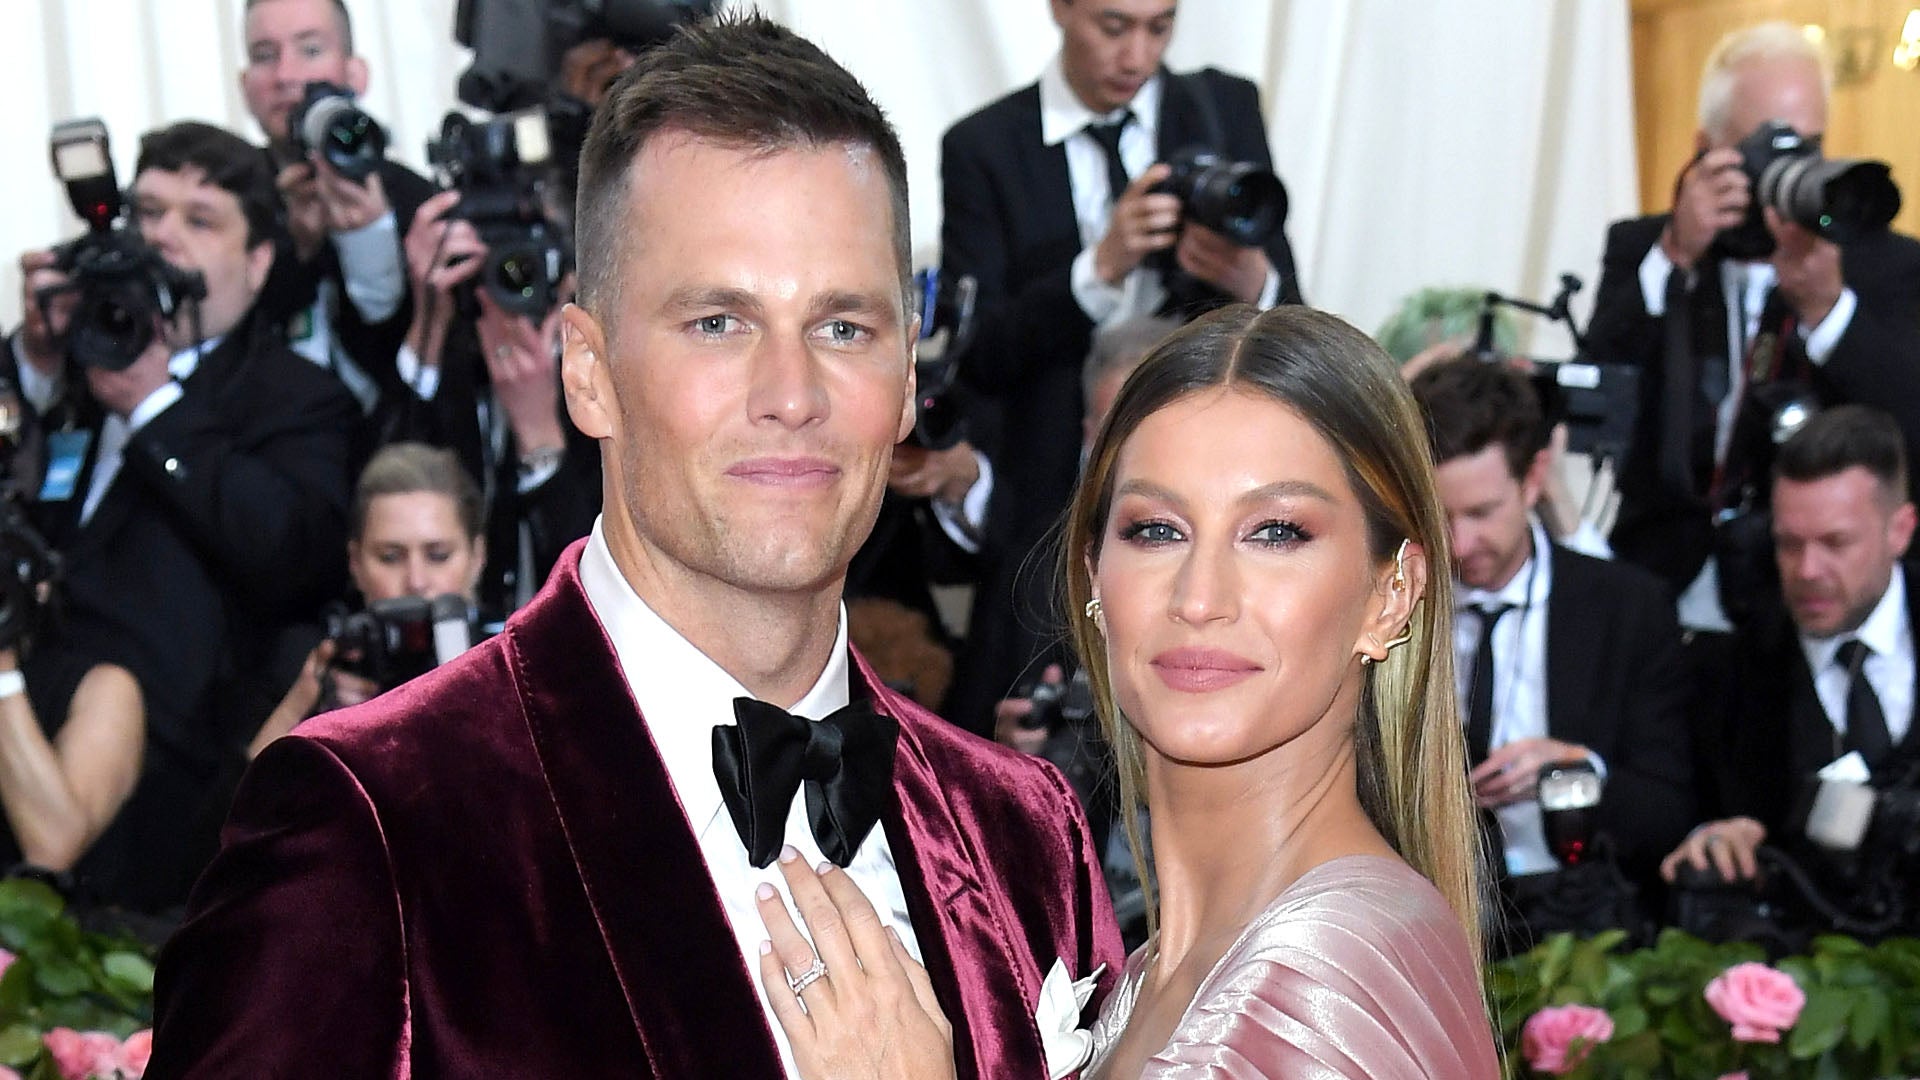 Gisele Bündchen Shows Support for Tom Brady Amid Rumored Marriage Trouble